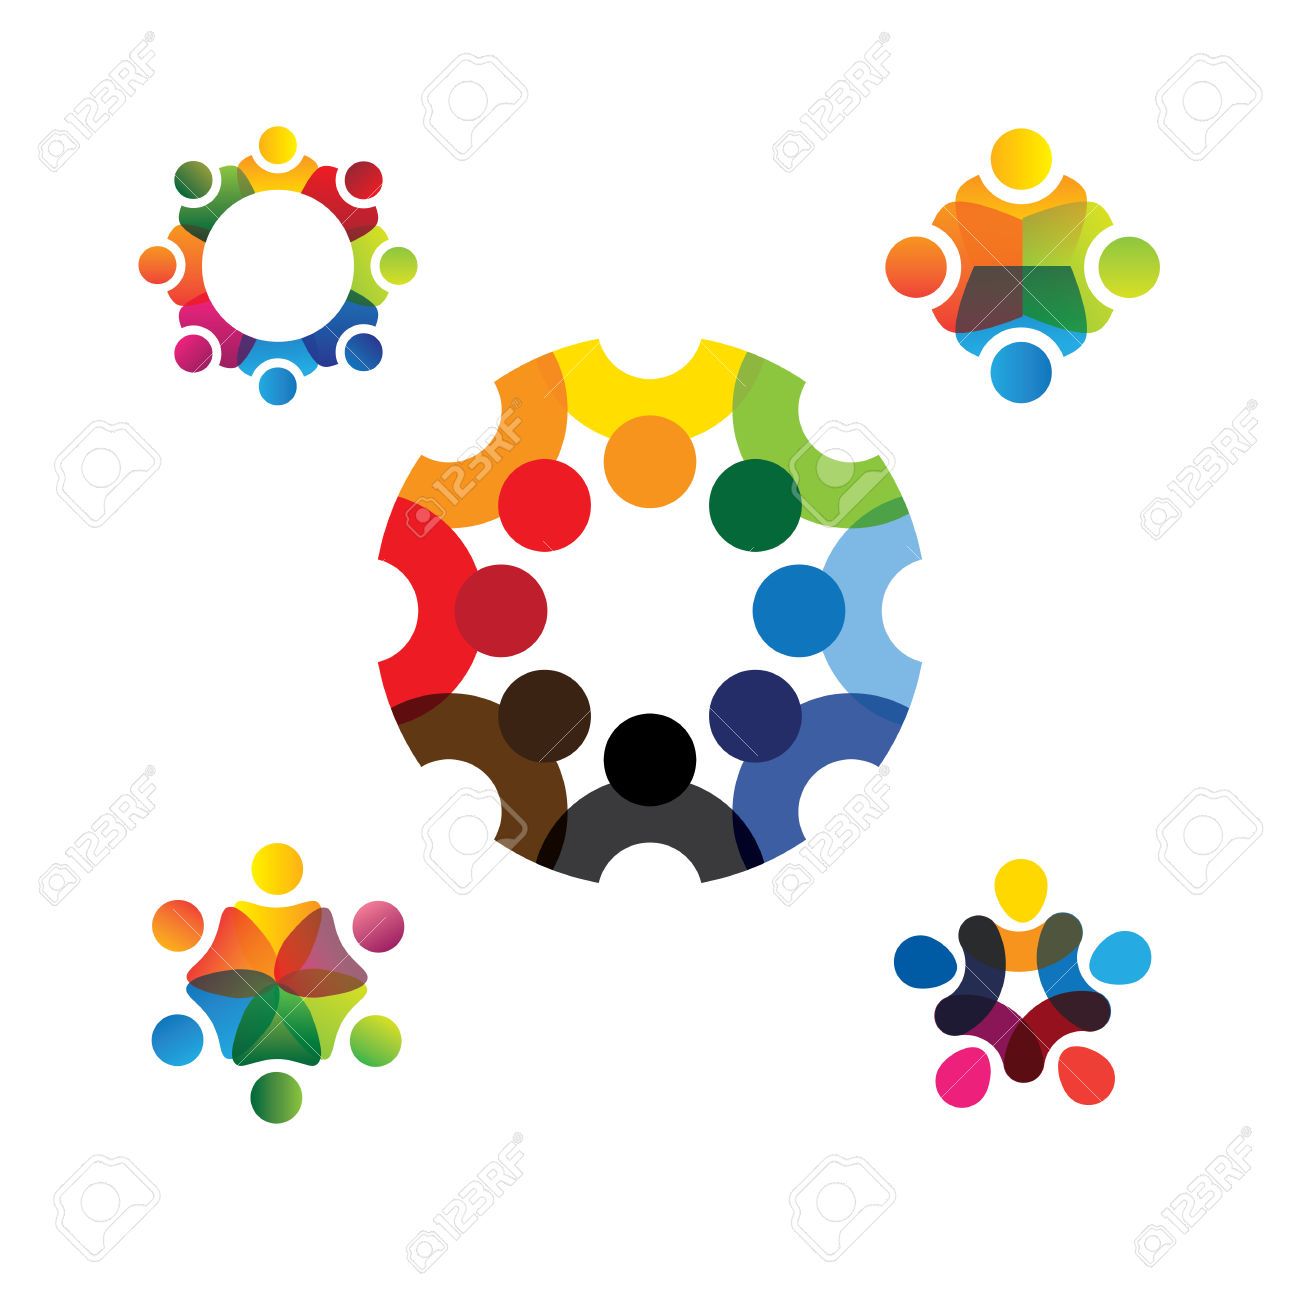 Community Stock Vector Illustration And Royalty Free